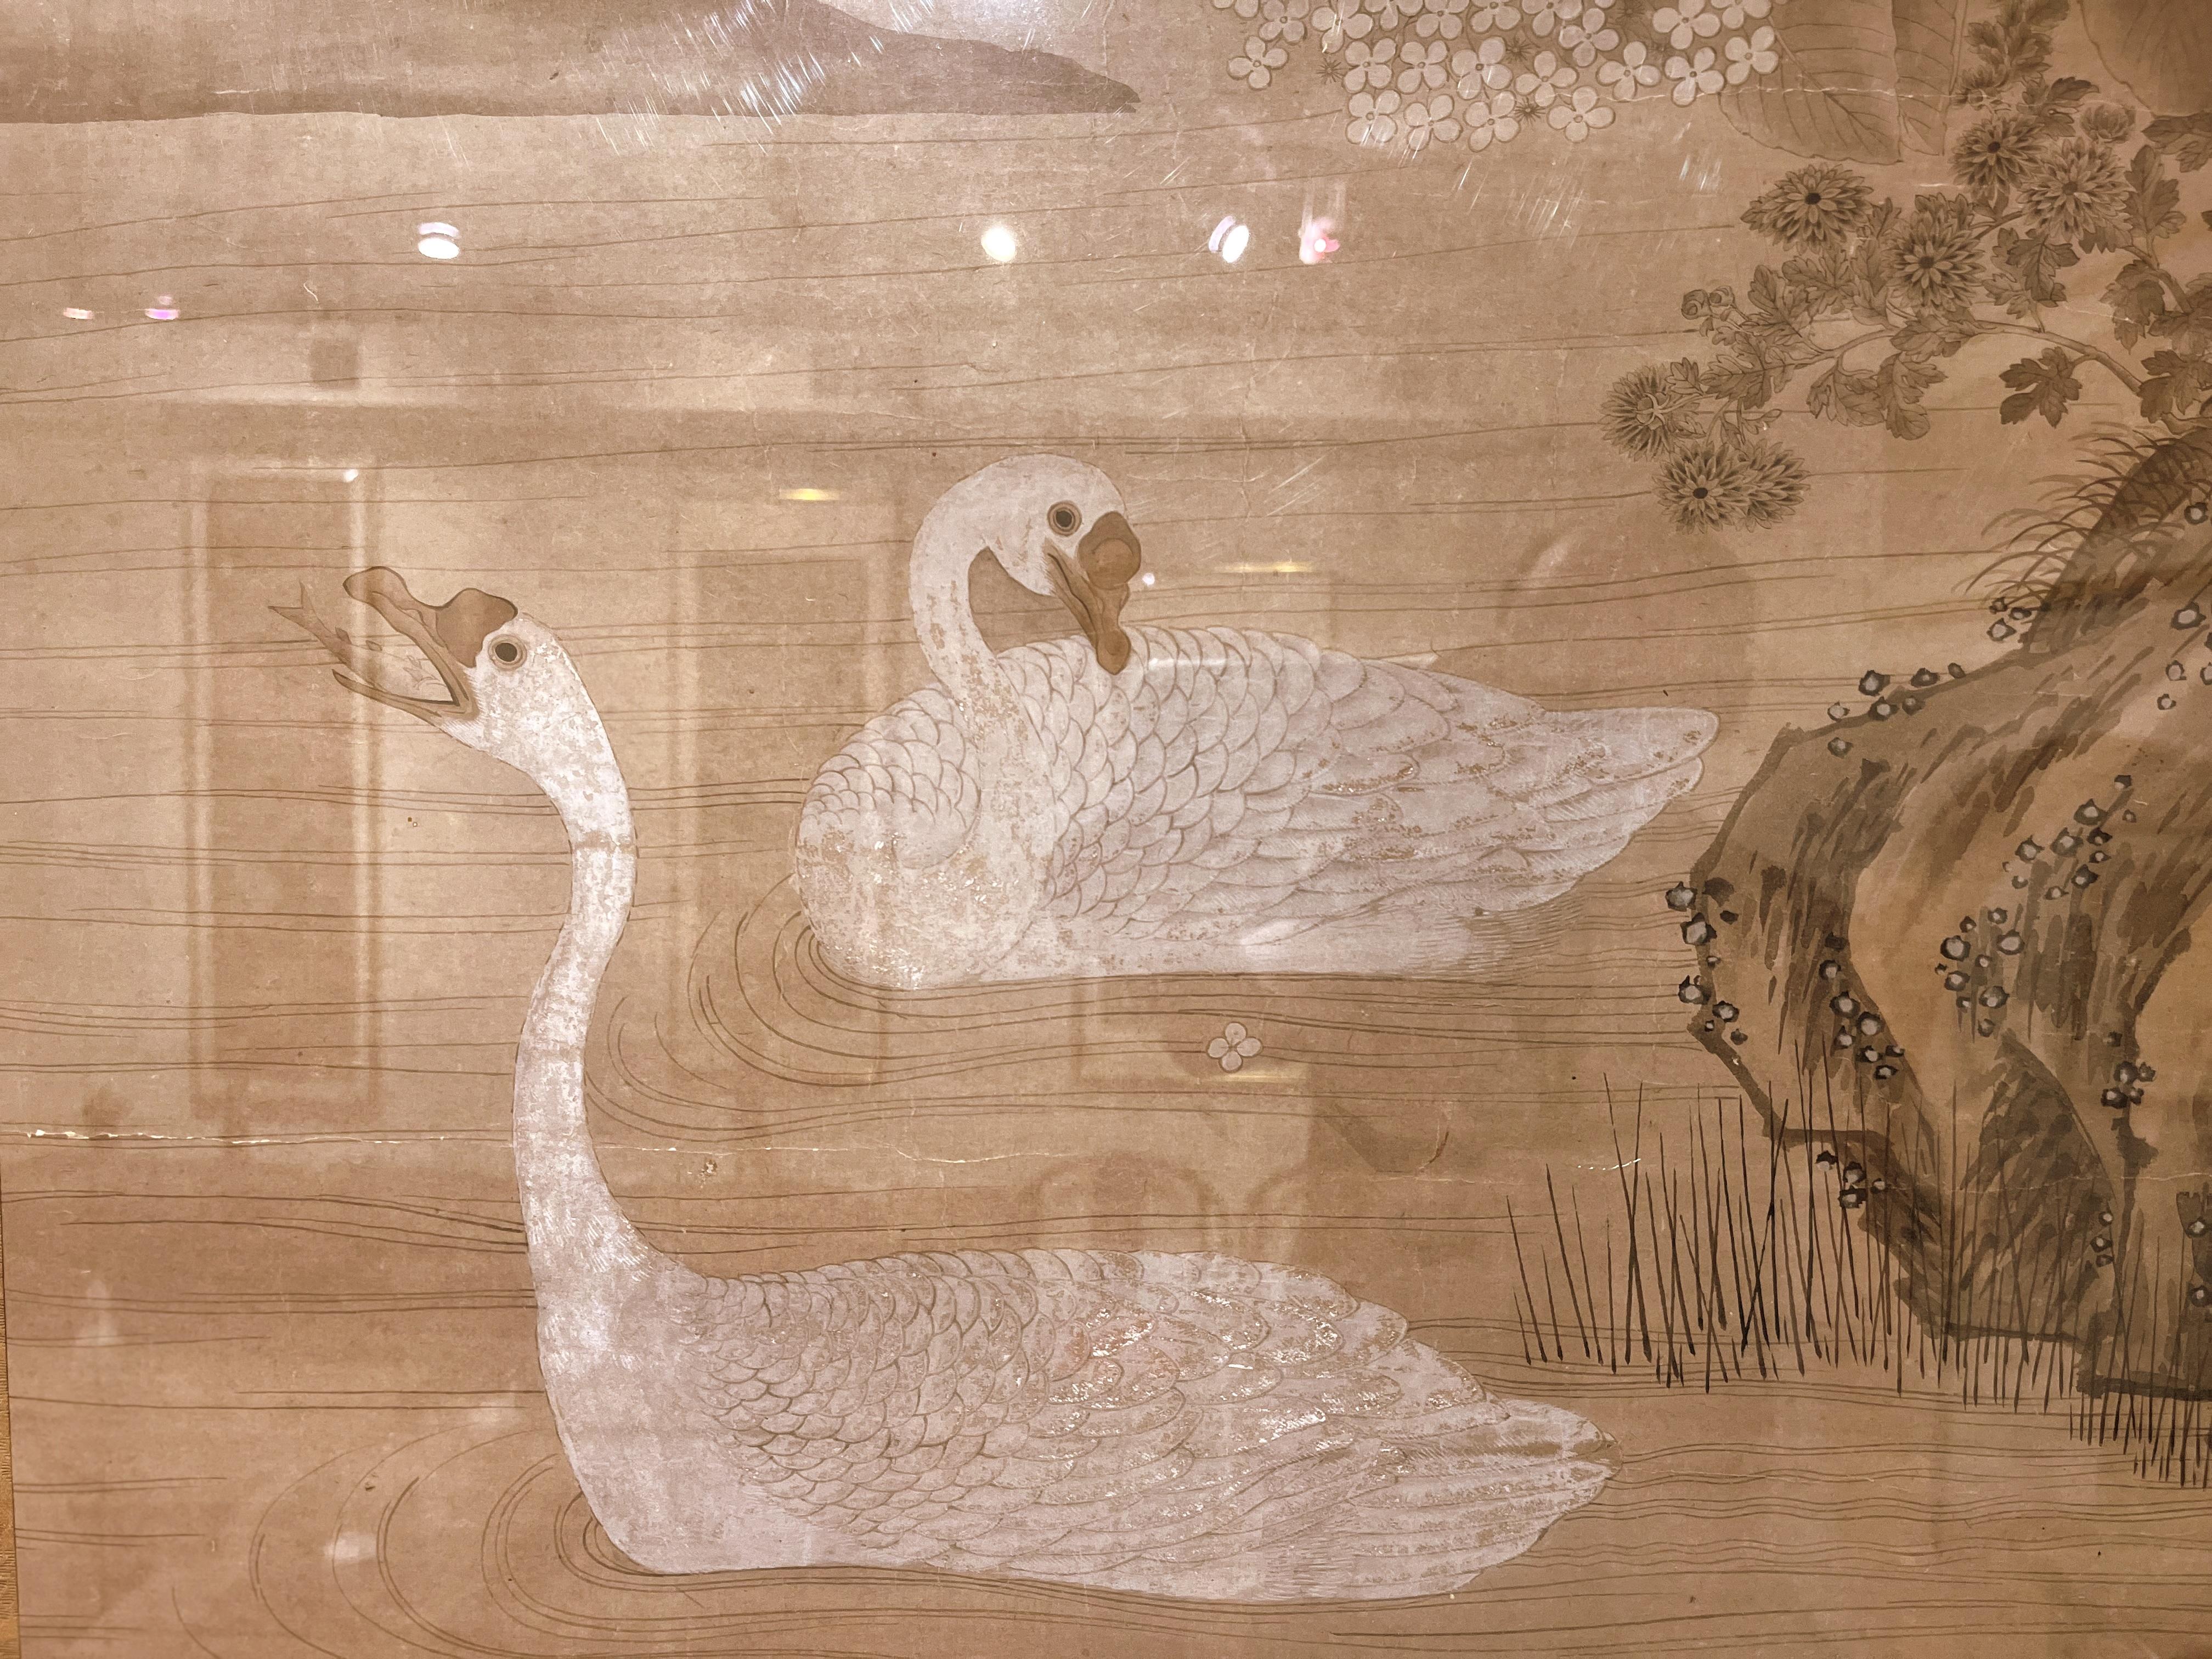 Paper Framed Japanese Brush Painting of Two White Geese Swimming in a Pond For Sale